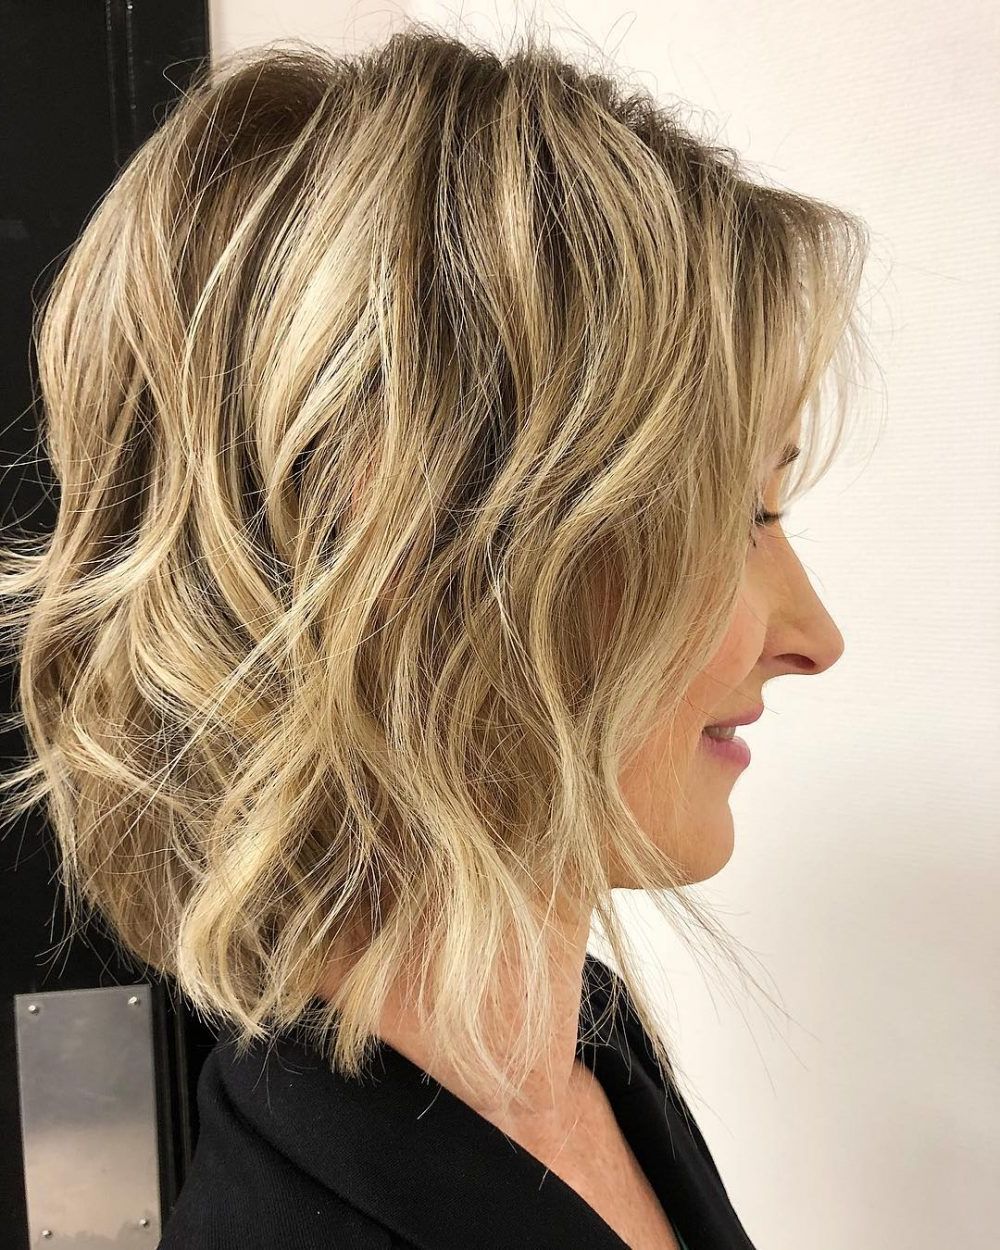 43 Perfect Short Hairstyles For Fine Hair In 2018 In Semi Short Layered Hairstyles (View 5 of 25)